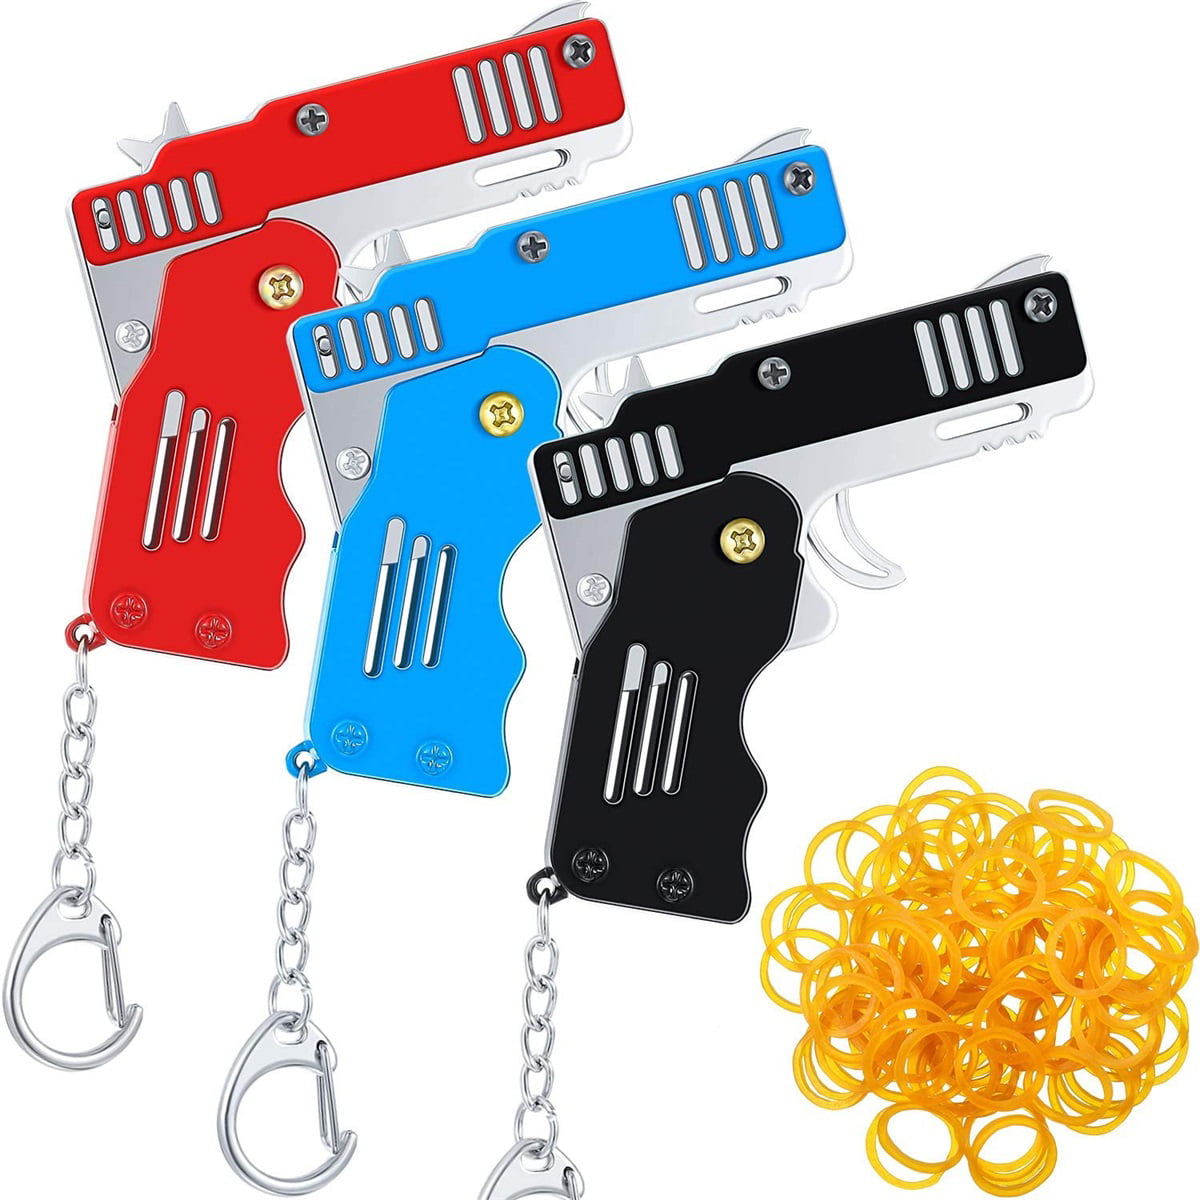 Rubber Band Gun Mini Metal Folding 6-Shot with Keychain Rubber Band  Best 